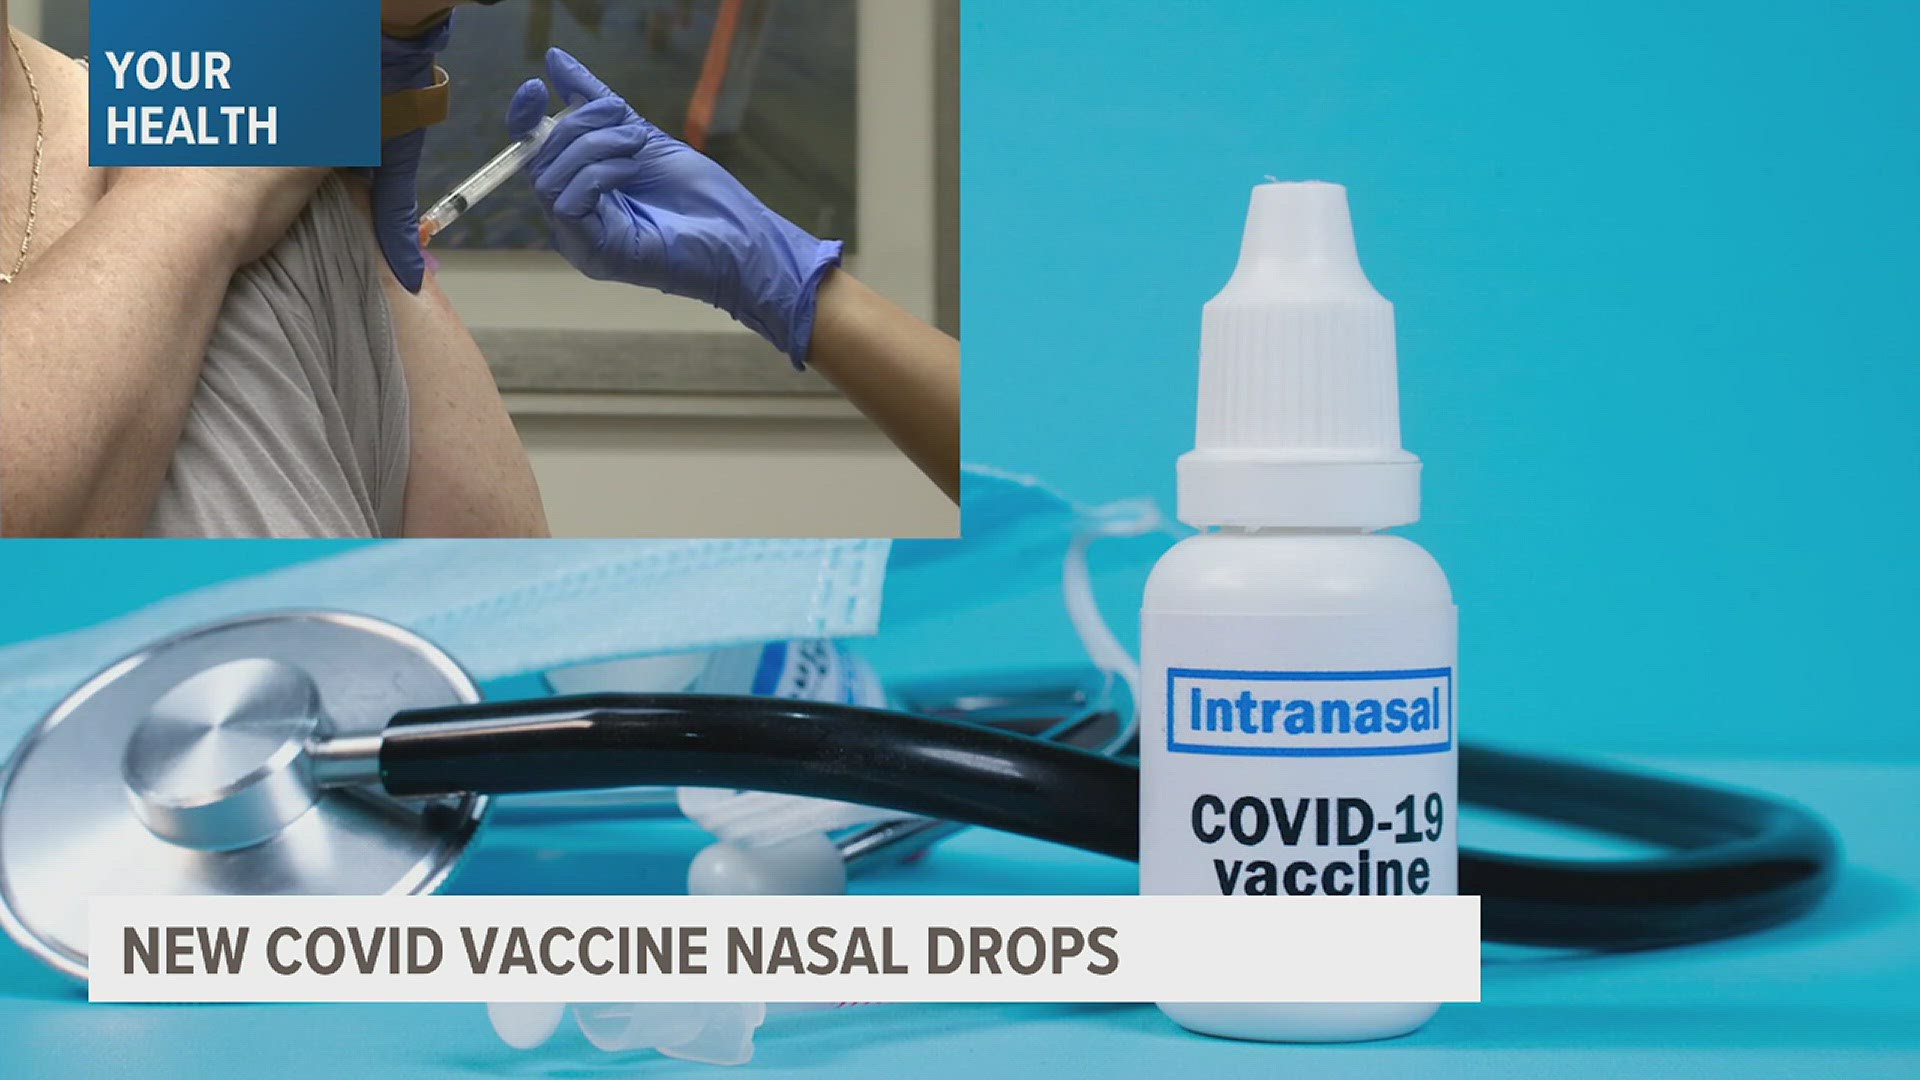 The new vaccine intends to destroy COVID while it's still in the nasal passageways, preventing further spread of the disease.